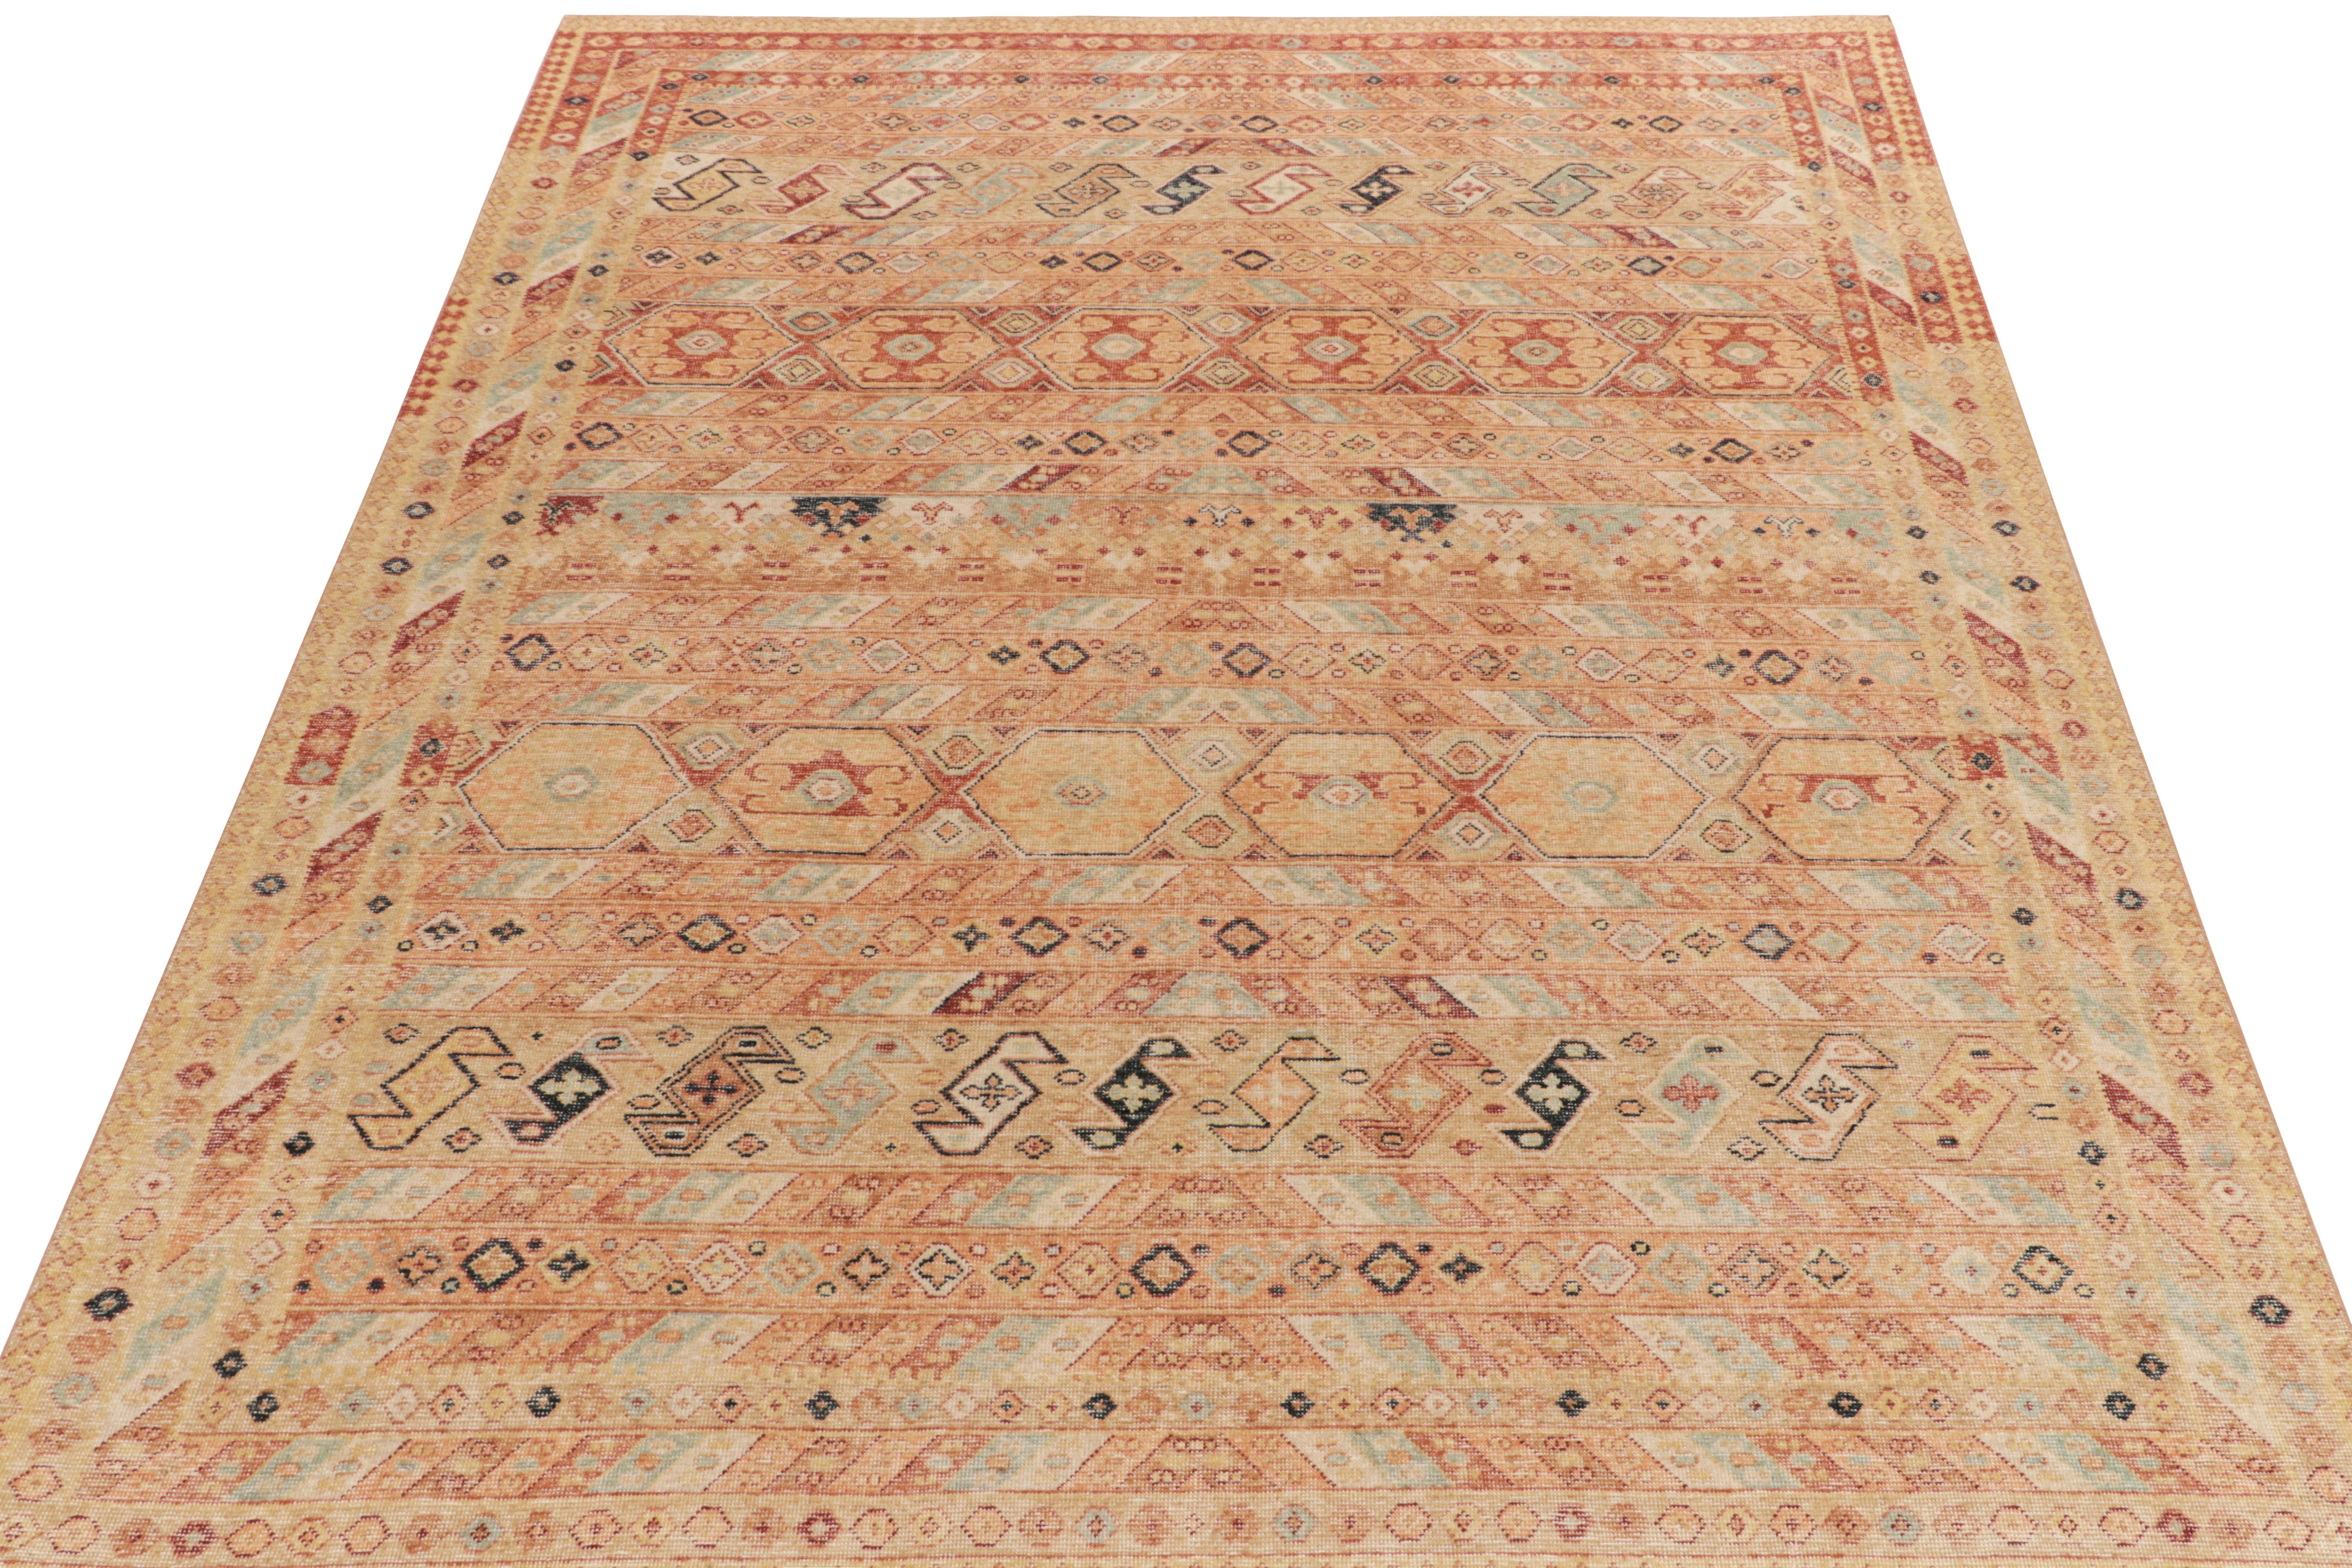 A 9x12 distressed style piece rom Rug & Kilim’s Homage Collection, enjoying an impeccable hand-knotted wool in this textural shabby-chic style. Inspired by tribal carpet styles, the rug witnesses a joyful union of geometry & traditional motifs